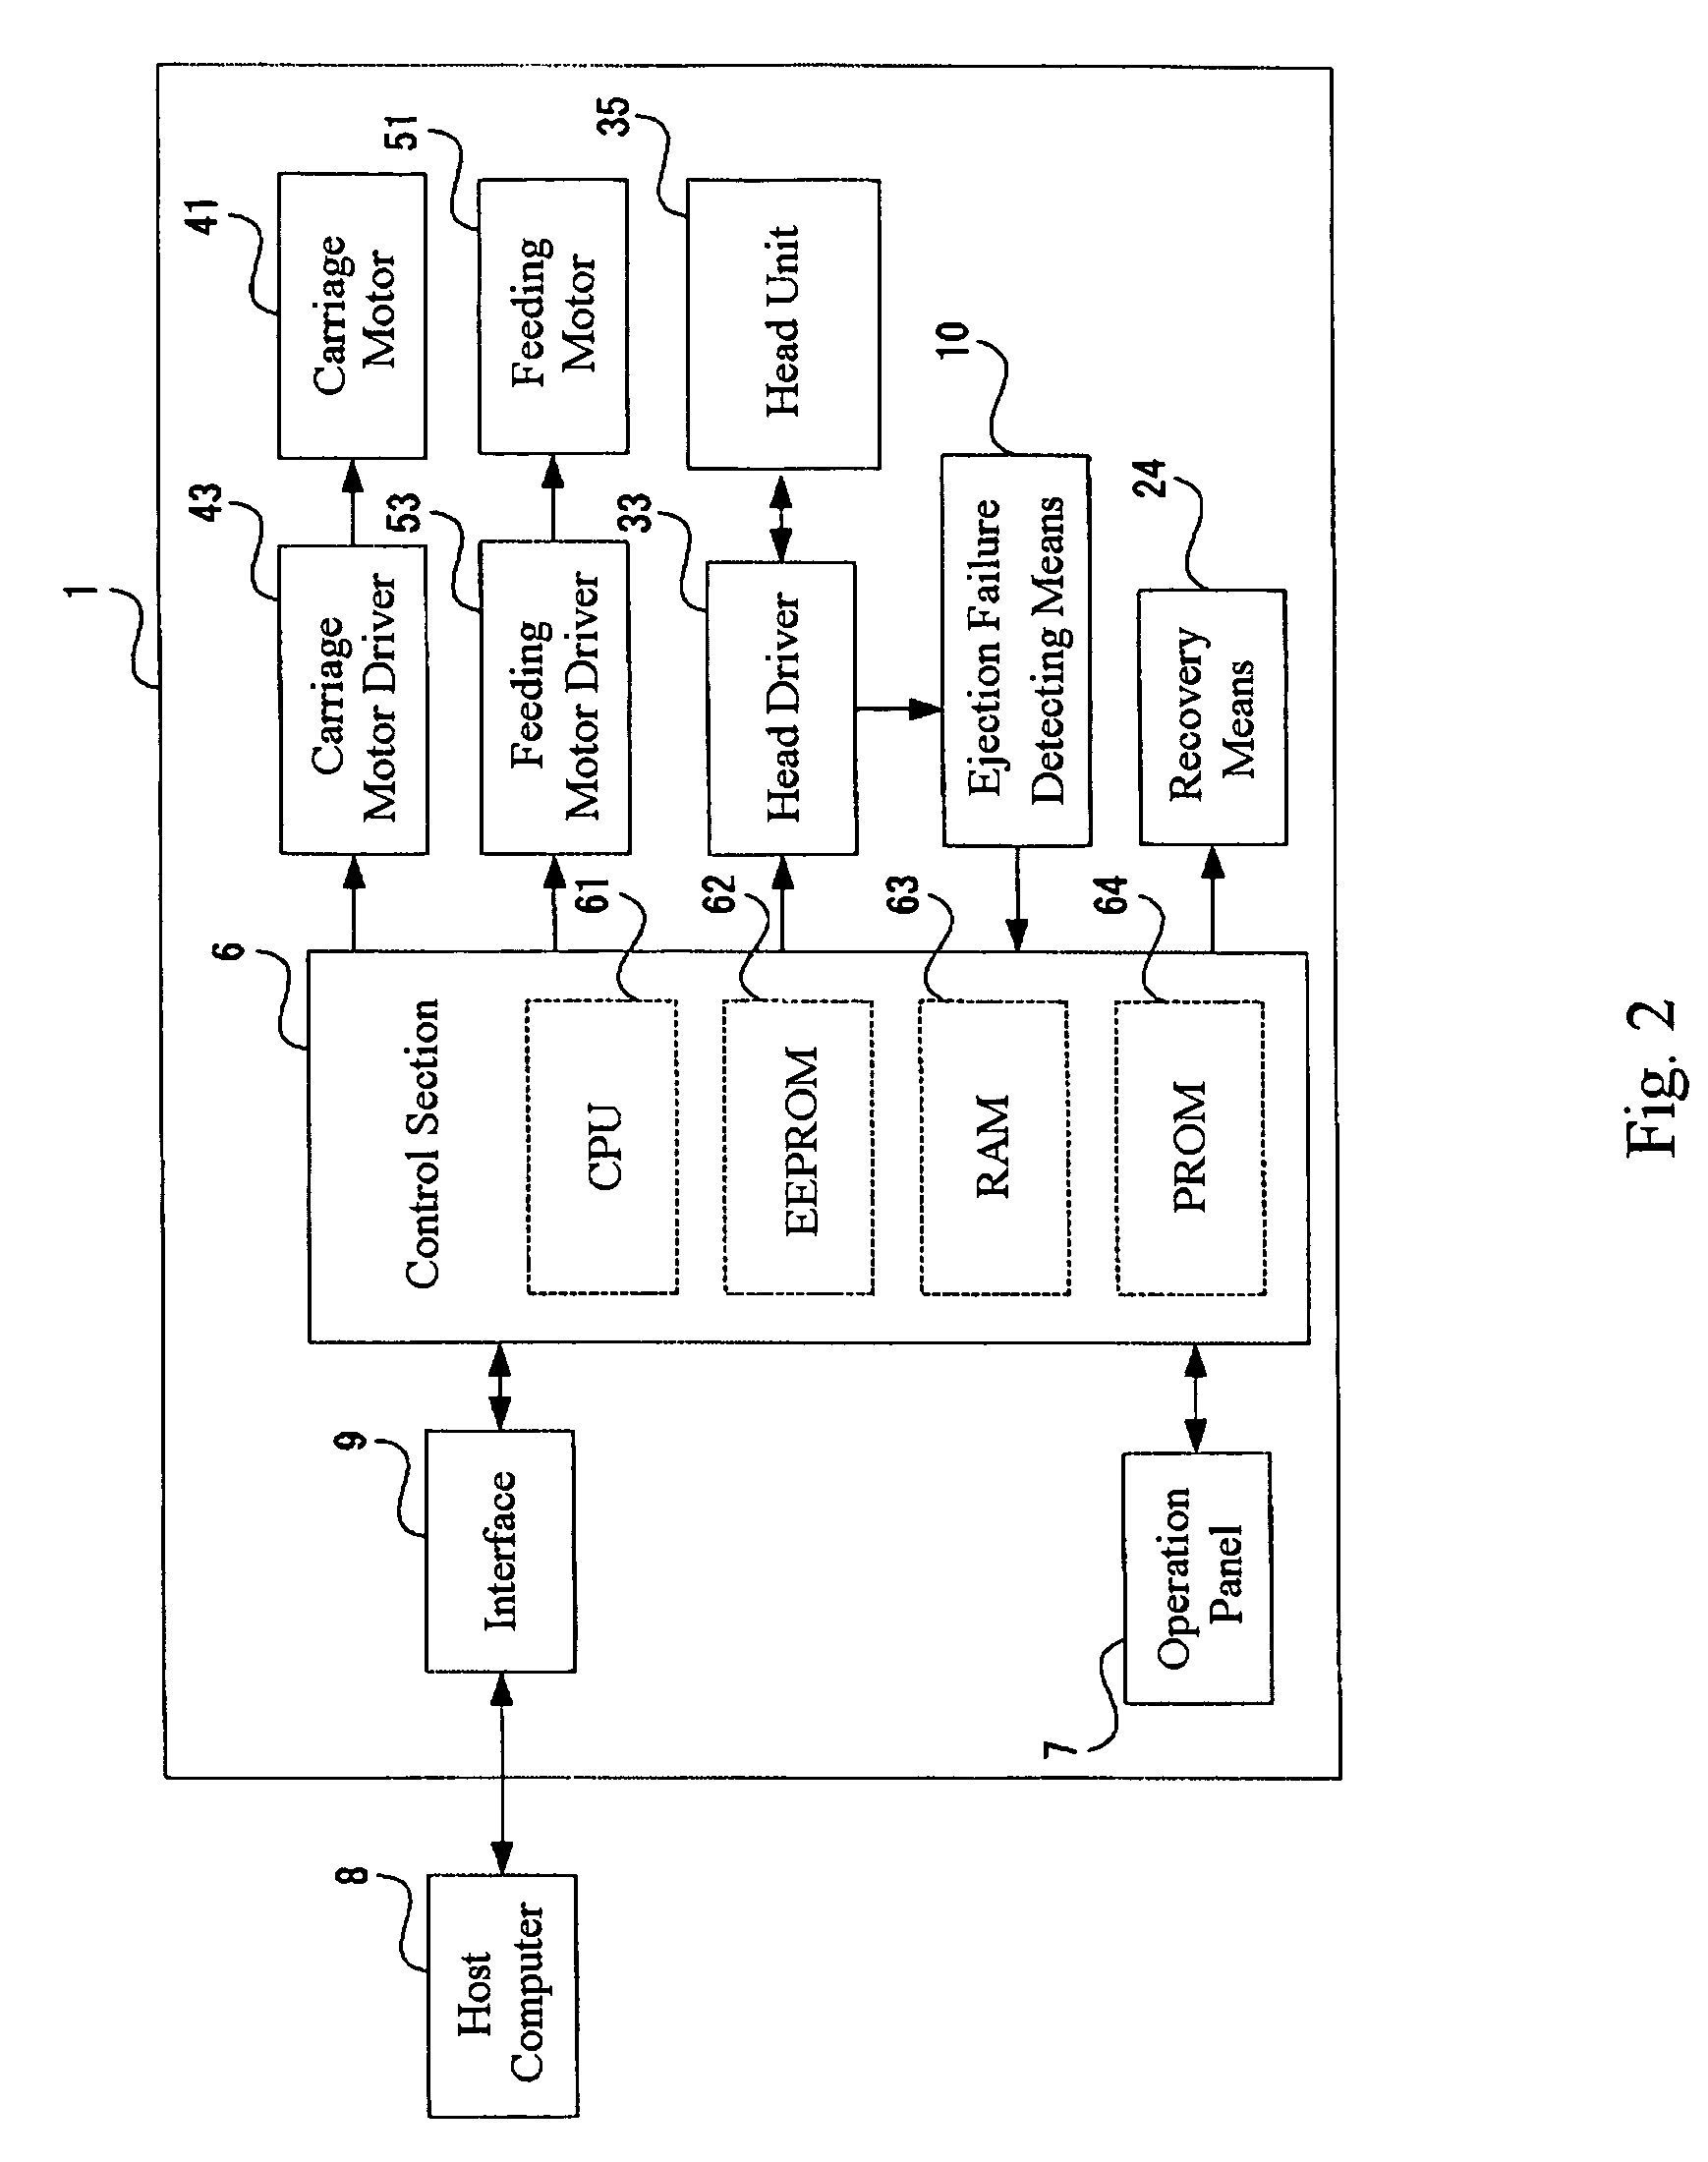 Droplet ejection apparatus with ejection failure detection means